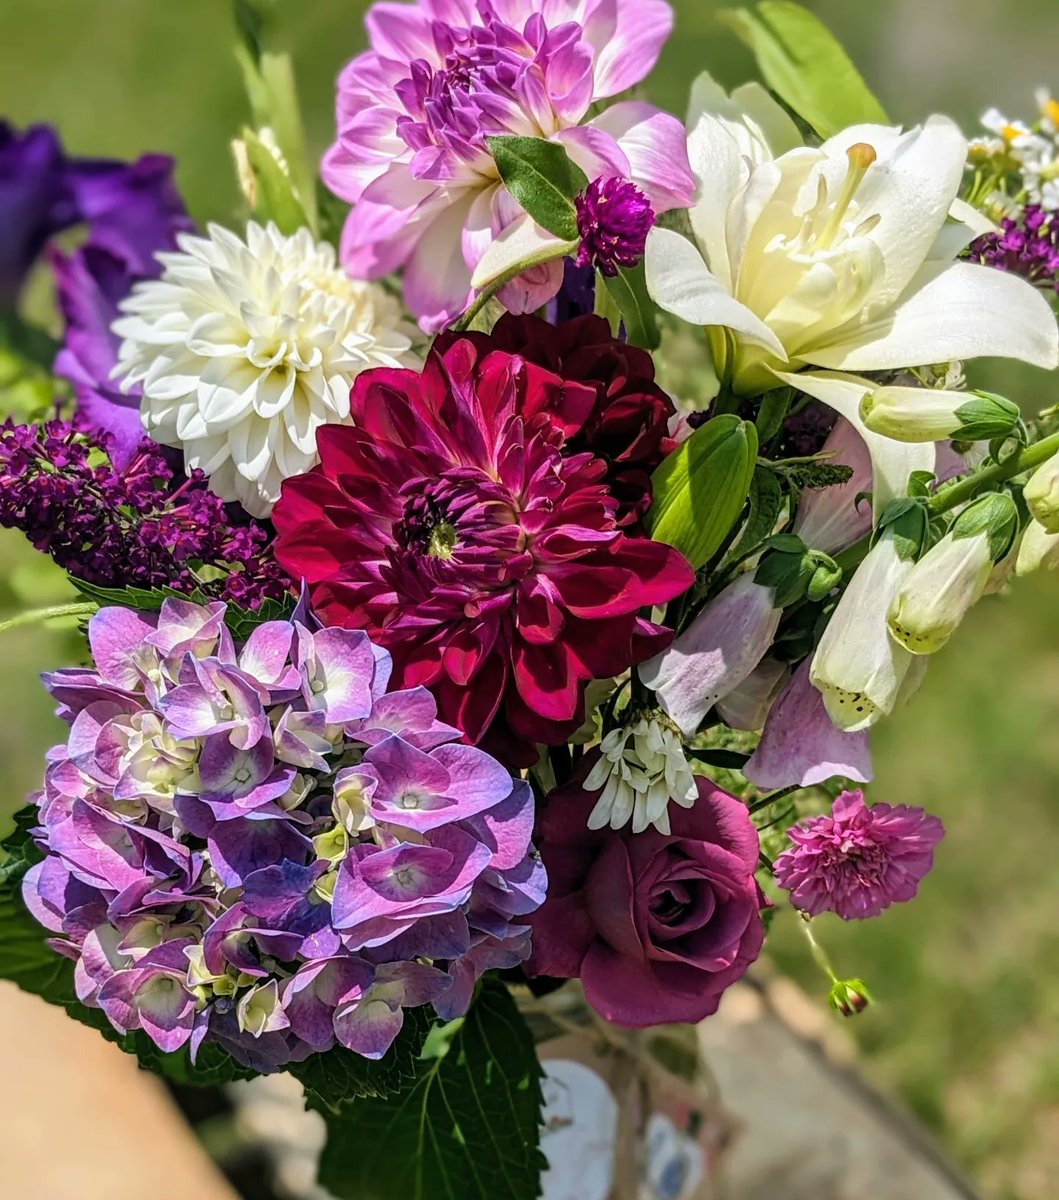 So many unique beauties! School colors... 🧡 💙 🎓
Year ✌️ is looking gorgeous! We have one available for pick-up! 😍💐
.
.
.
.
#blessingsgrow #bloomstoshare #givingGodtheglory #metterblooms #graduationflowers #locallygrown #growingwithpurpose #somanyflowers #thankful